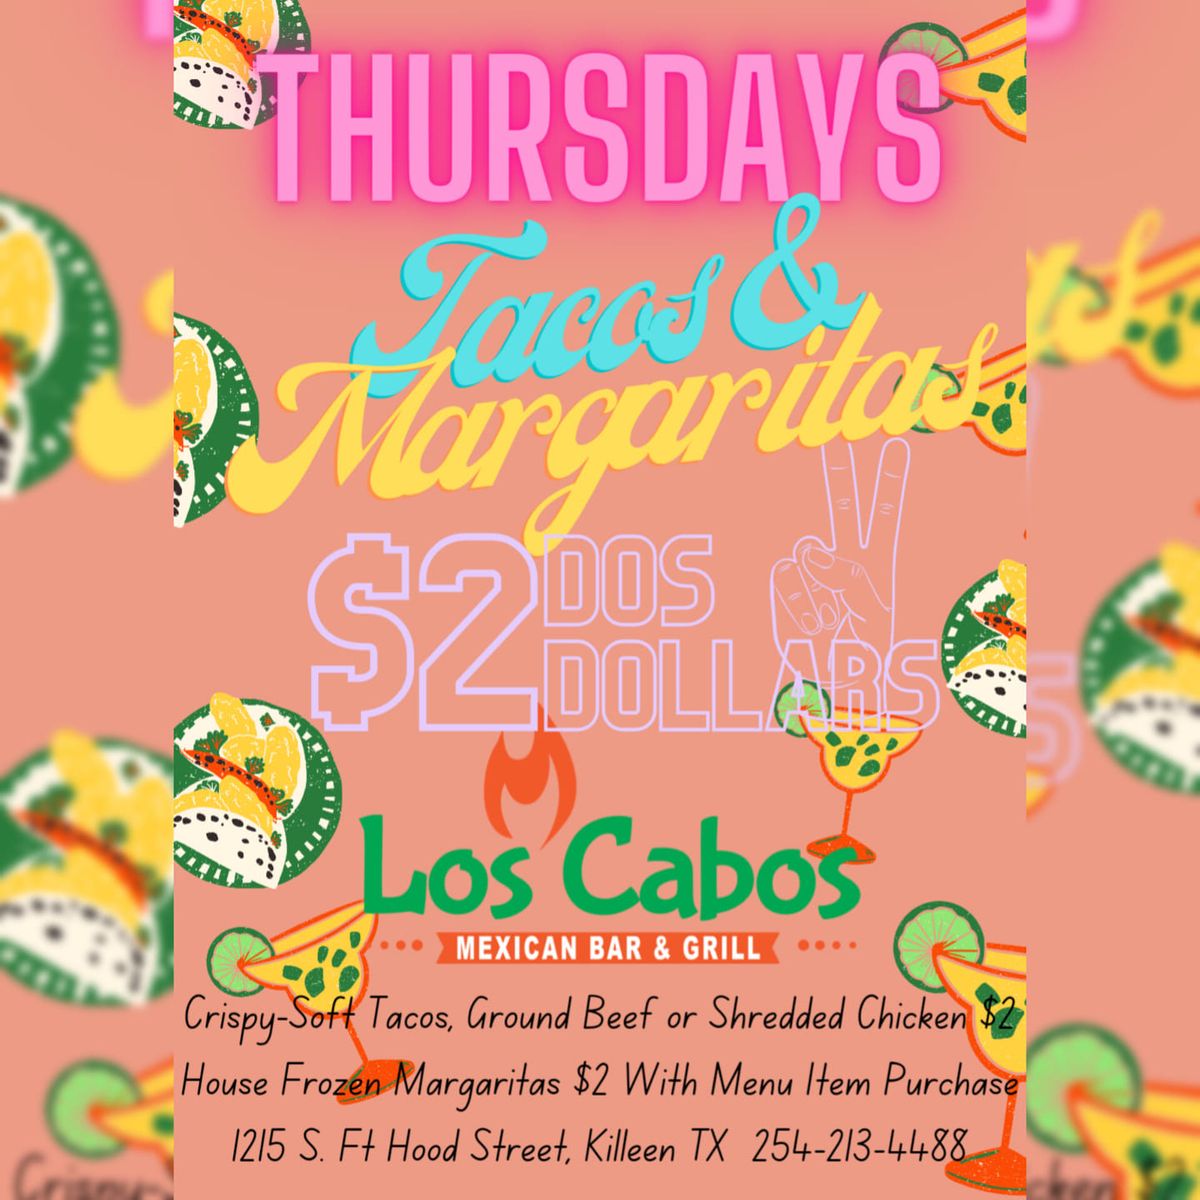 $2 Margaritas and $2 Tacos